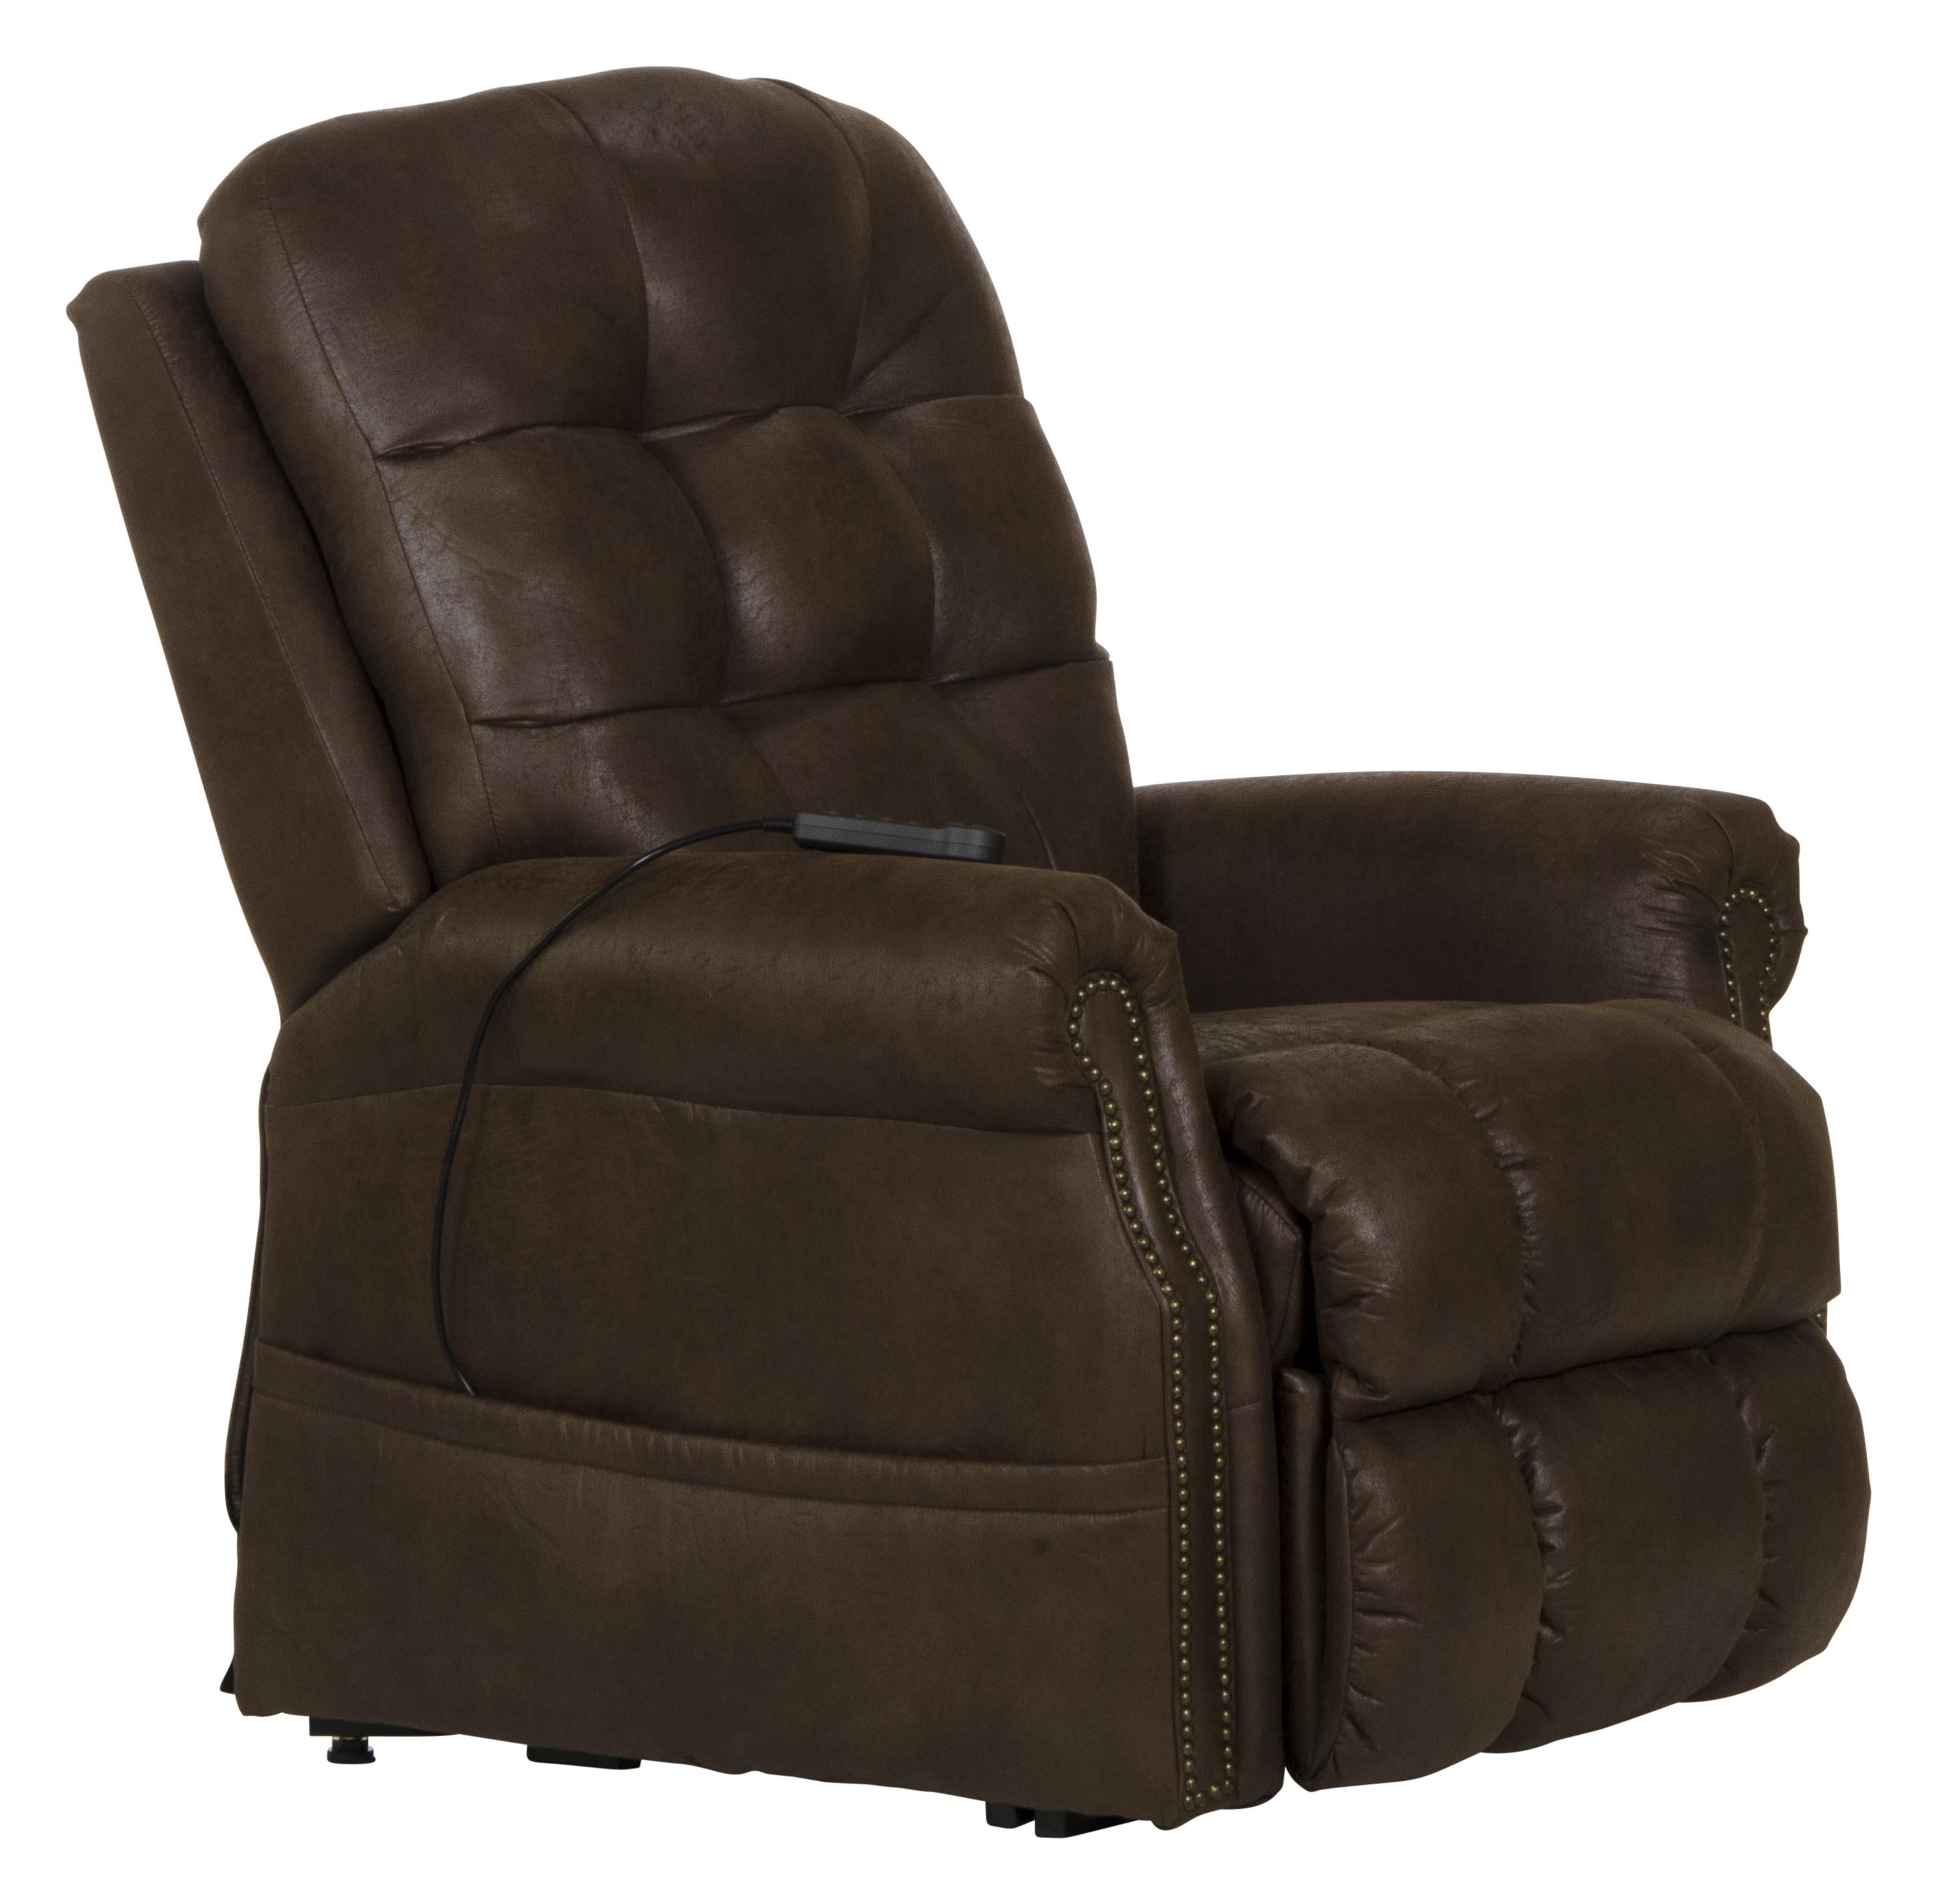 Ramsey Power Lift Lay Flat Recliner with Heat and Massage